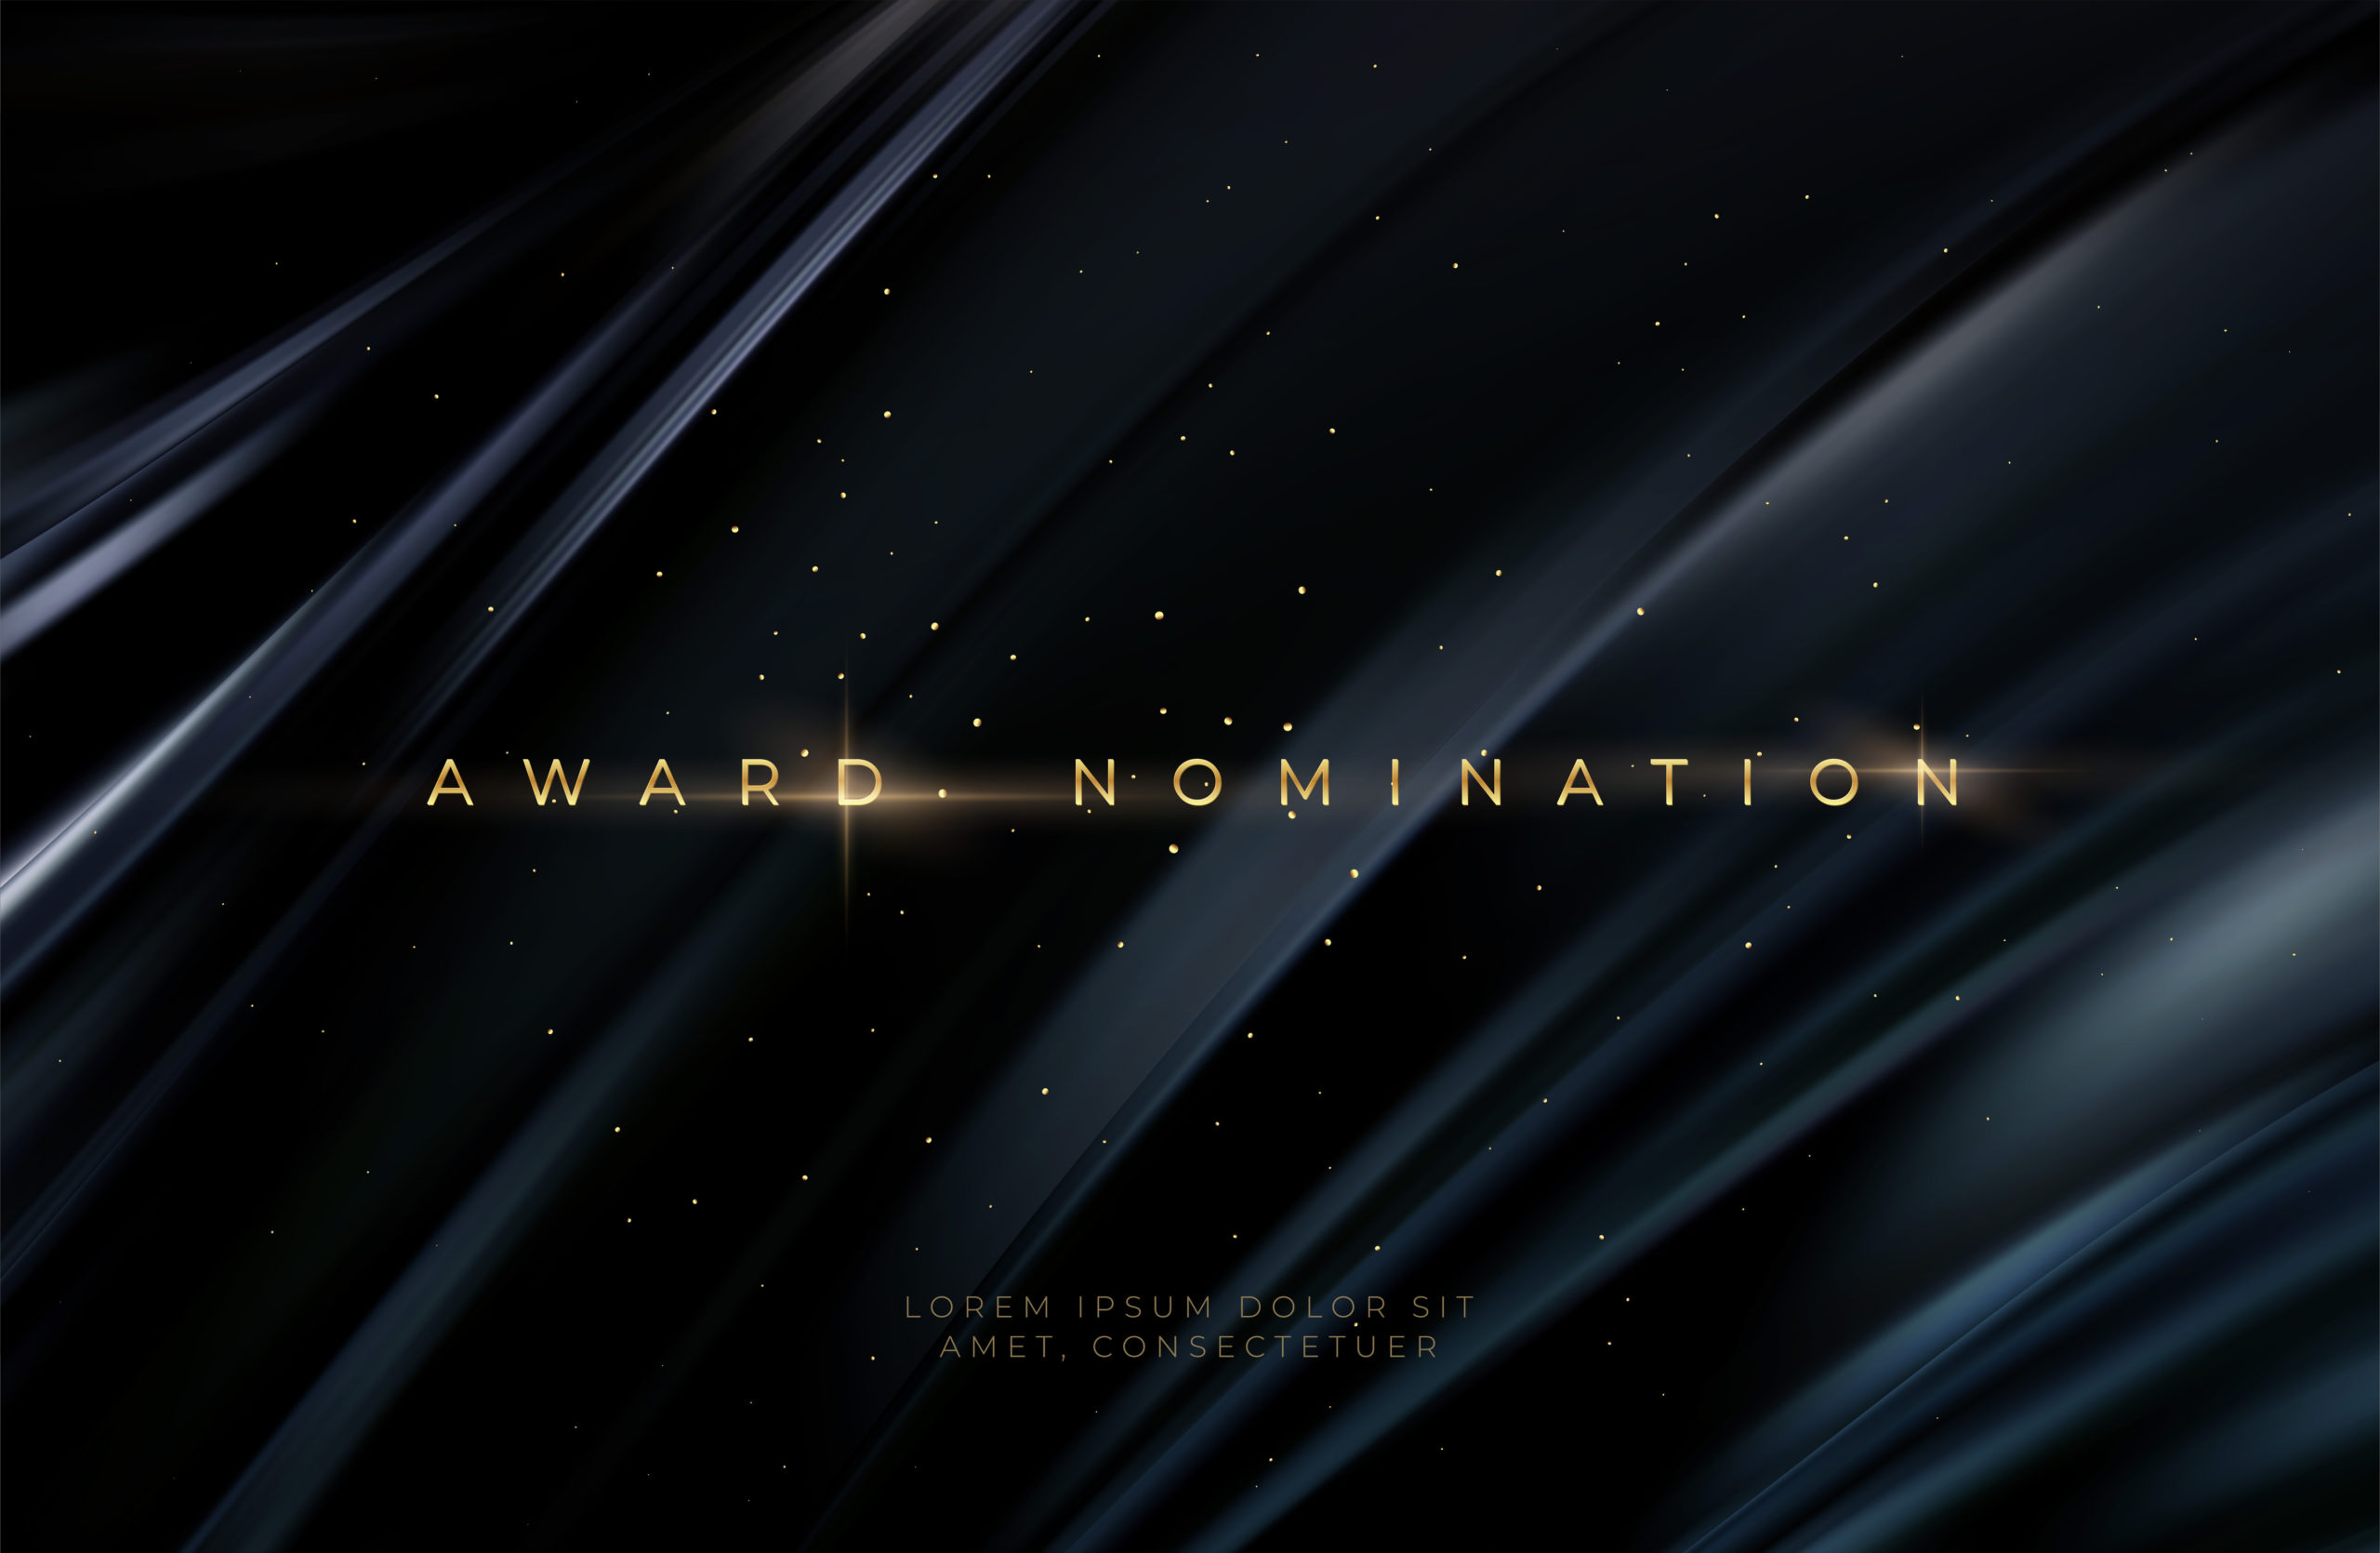 Black background with golden glitter - "Award nomination" in gold letters